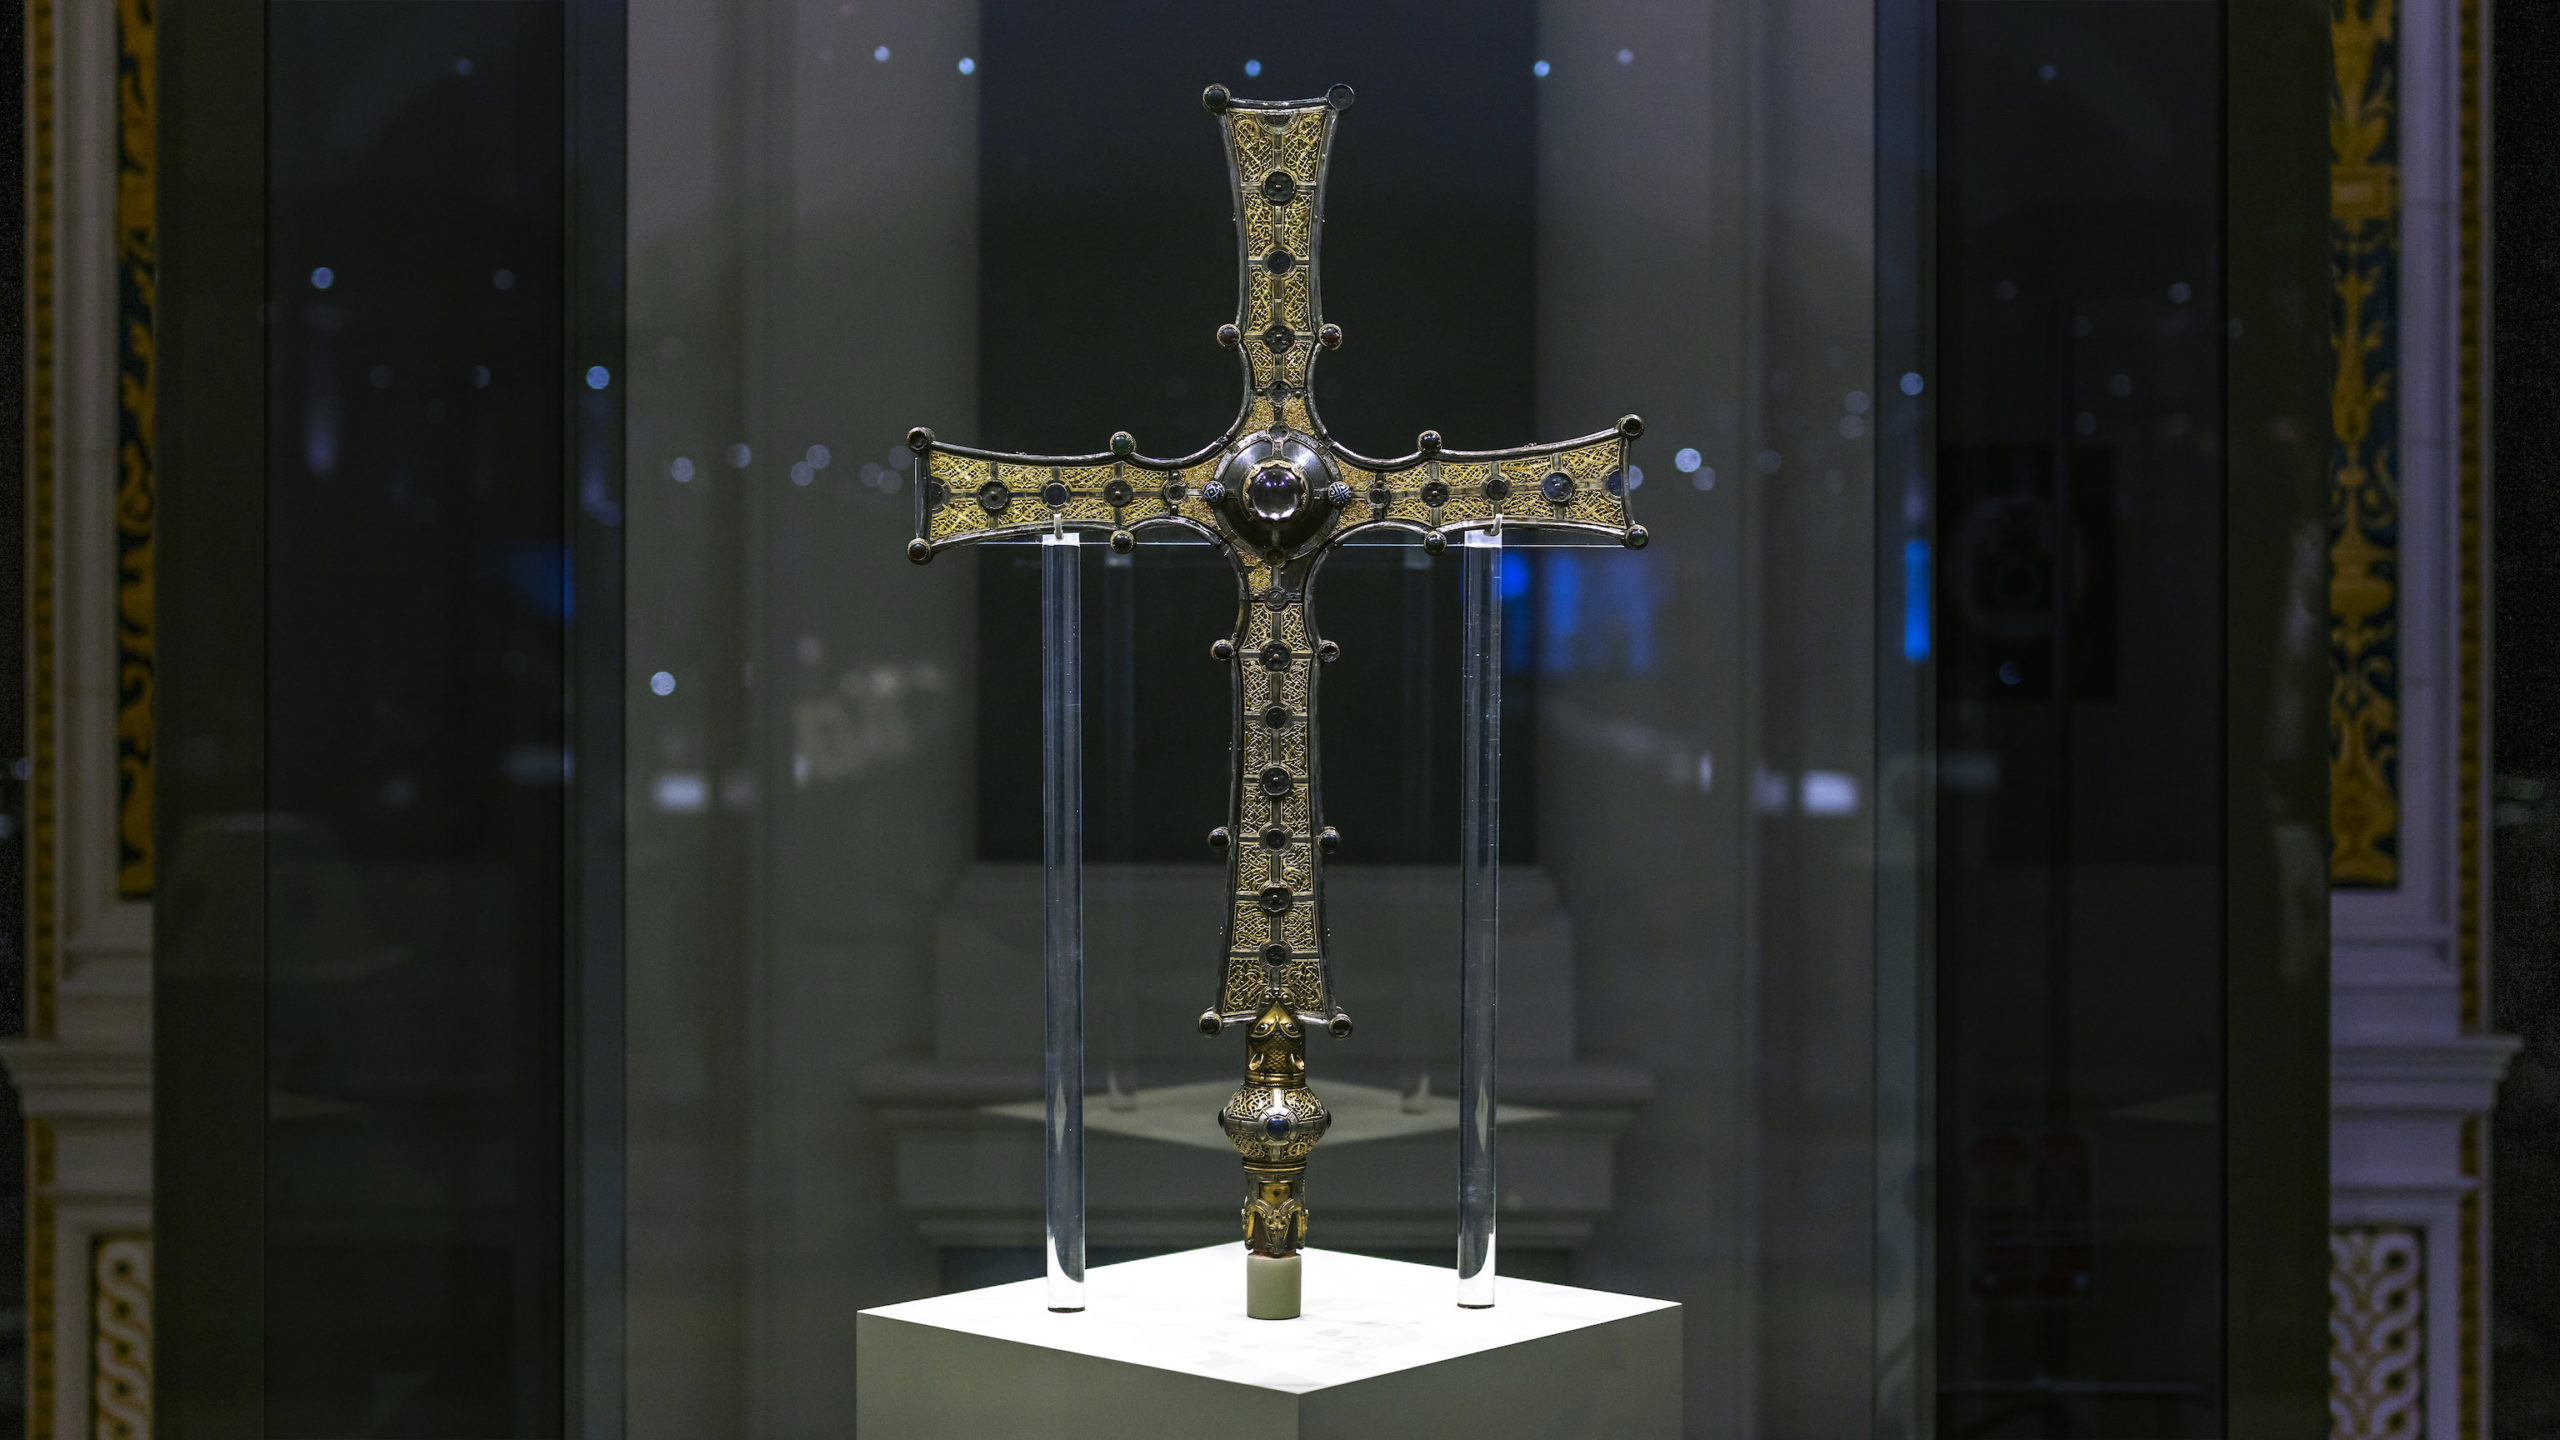 Máel Ísú mac Bratáin Uí Echach, The Cross of Cong (commissiond by Toirrdelbach Ua Conchobair king of Connacht and high king of Ireland, 1123, oak core within cast bronze, rock crystal, gold filigree, gilding, silver sheeting, niello and silver inlay, glass, and enamel, 76 x 48 x 3.5 cm (National Museum of Ireland)